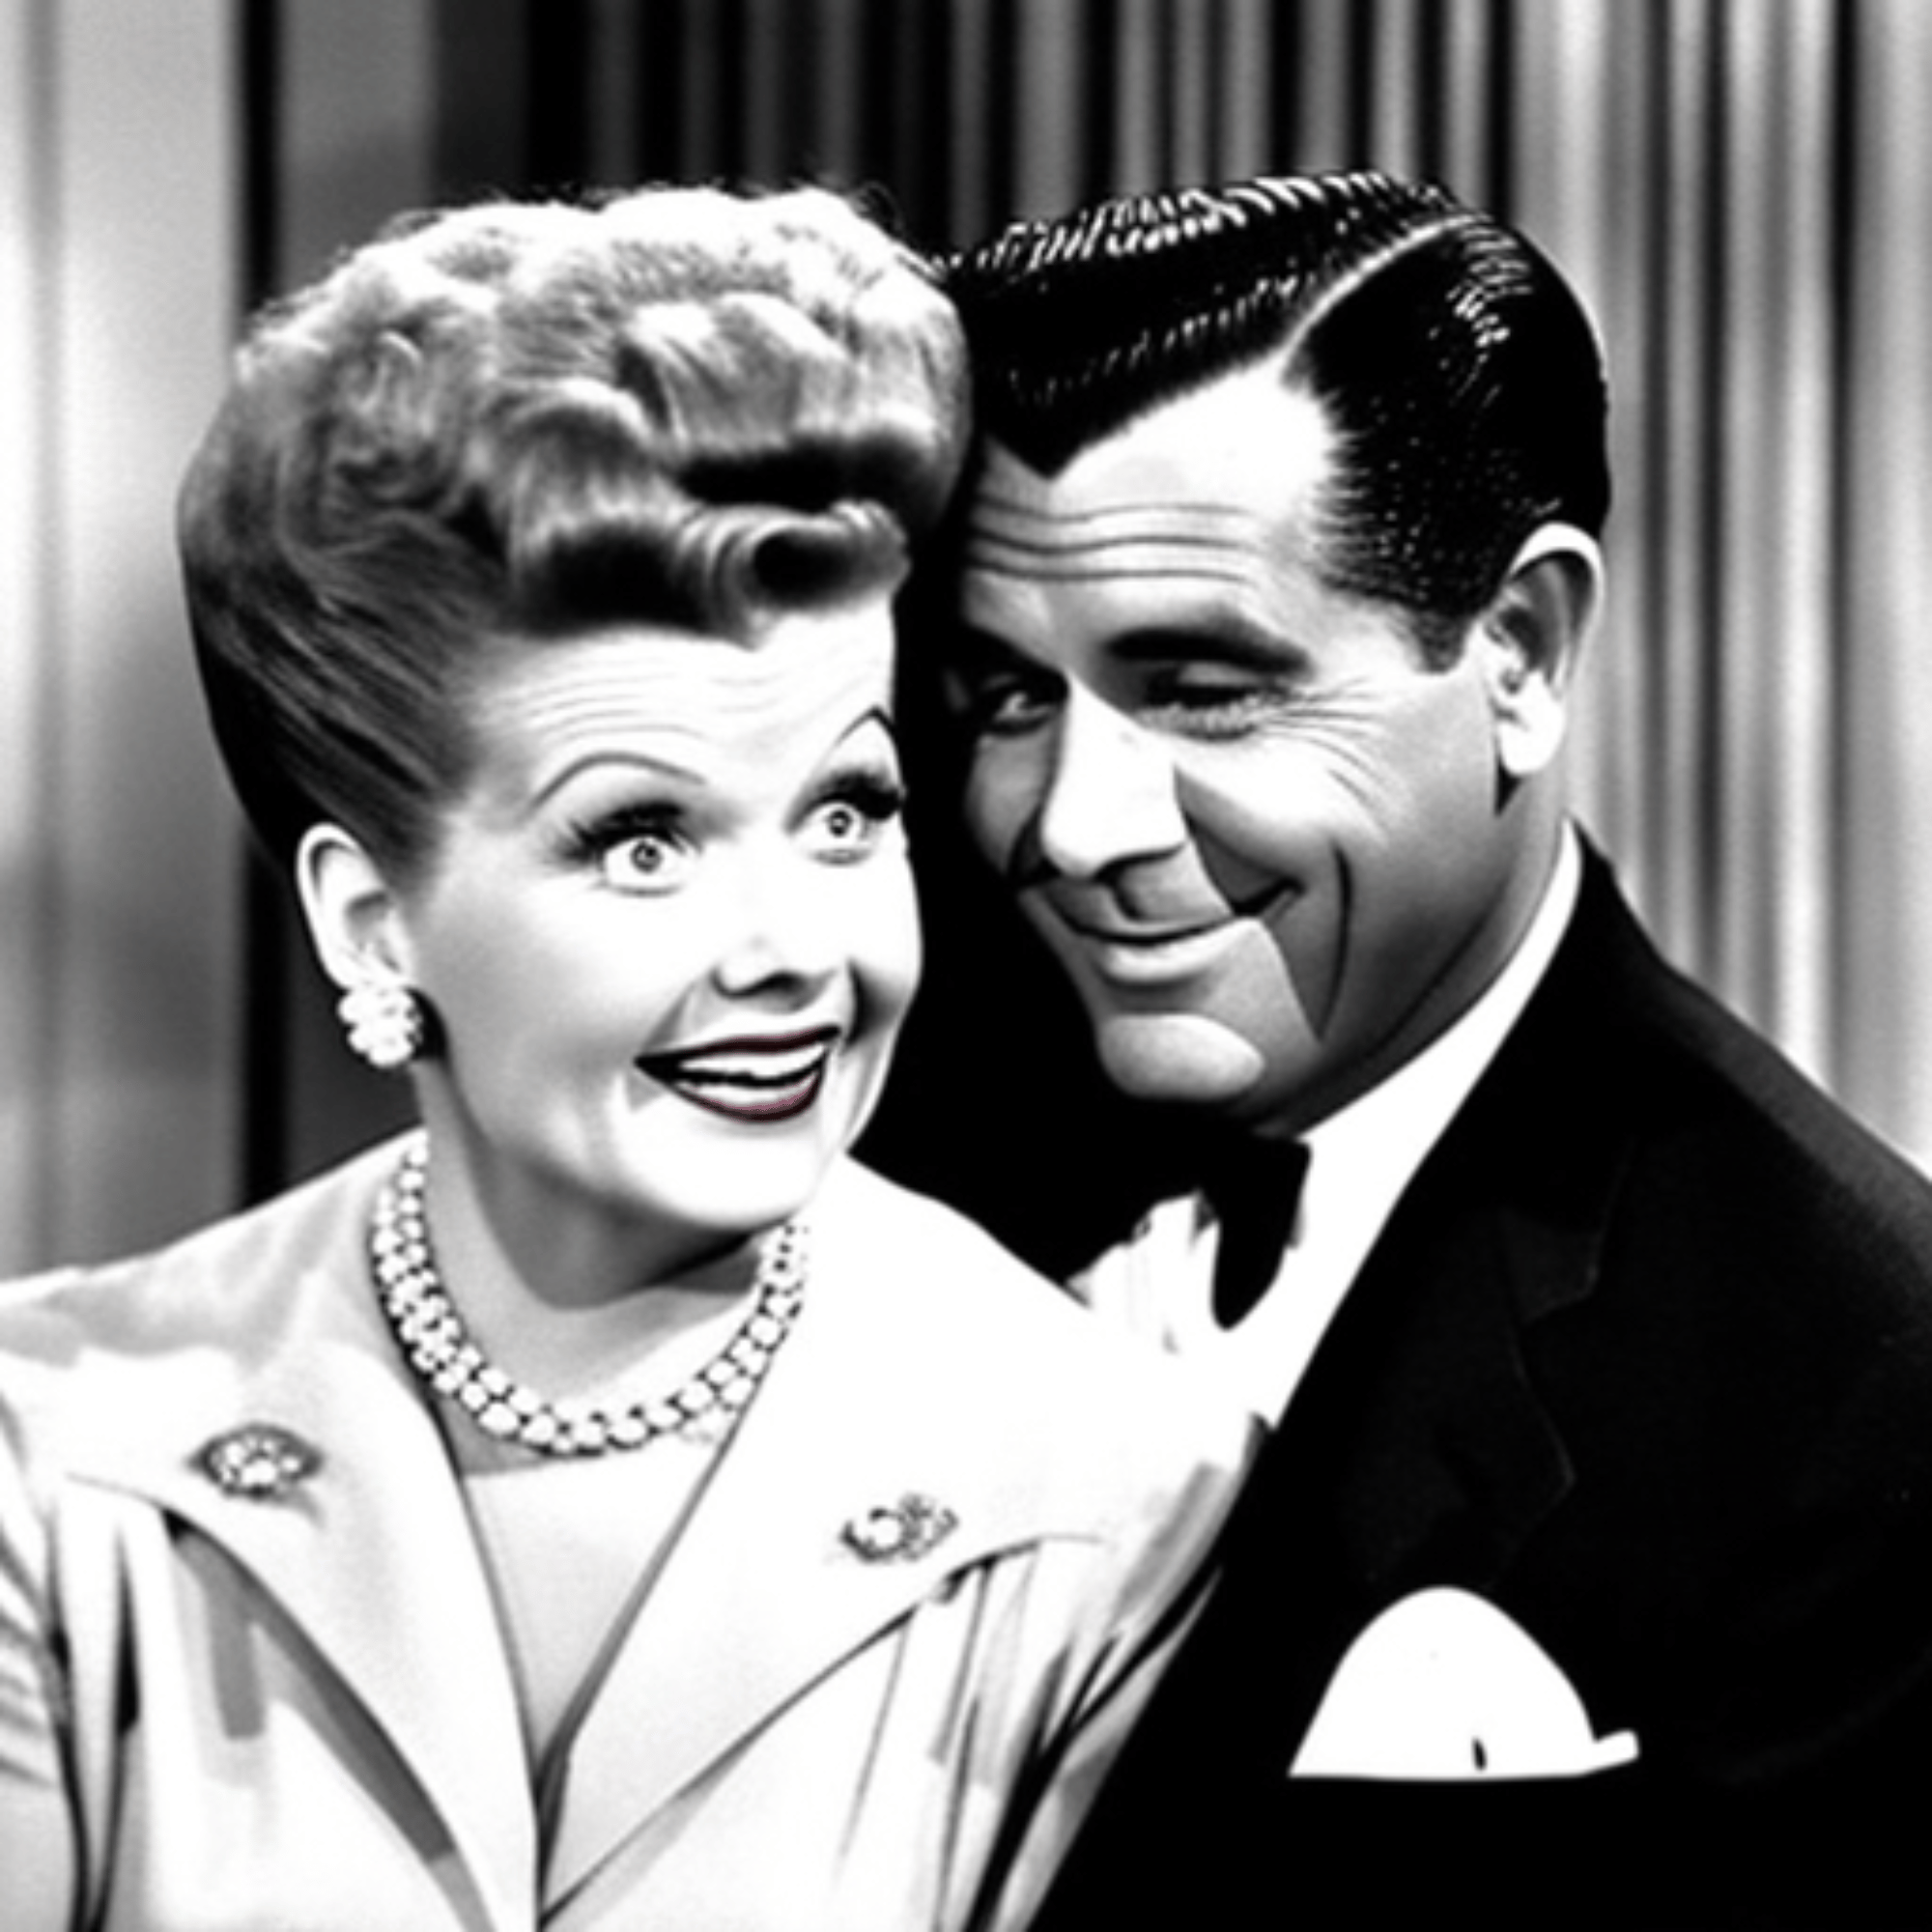 A still frame of a classic television show, such as I Love Lucy, to represent the evolution of television over the years